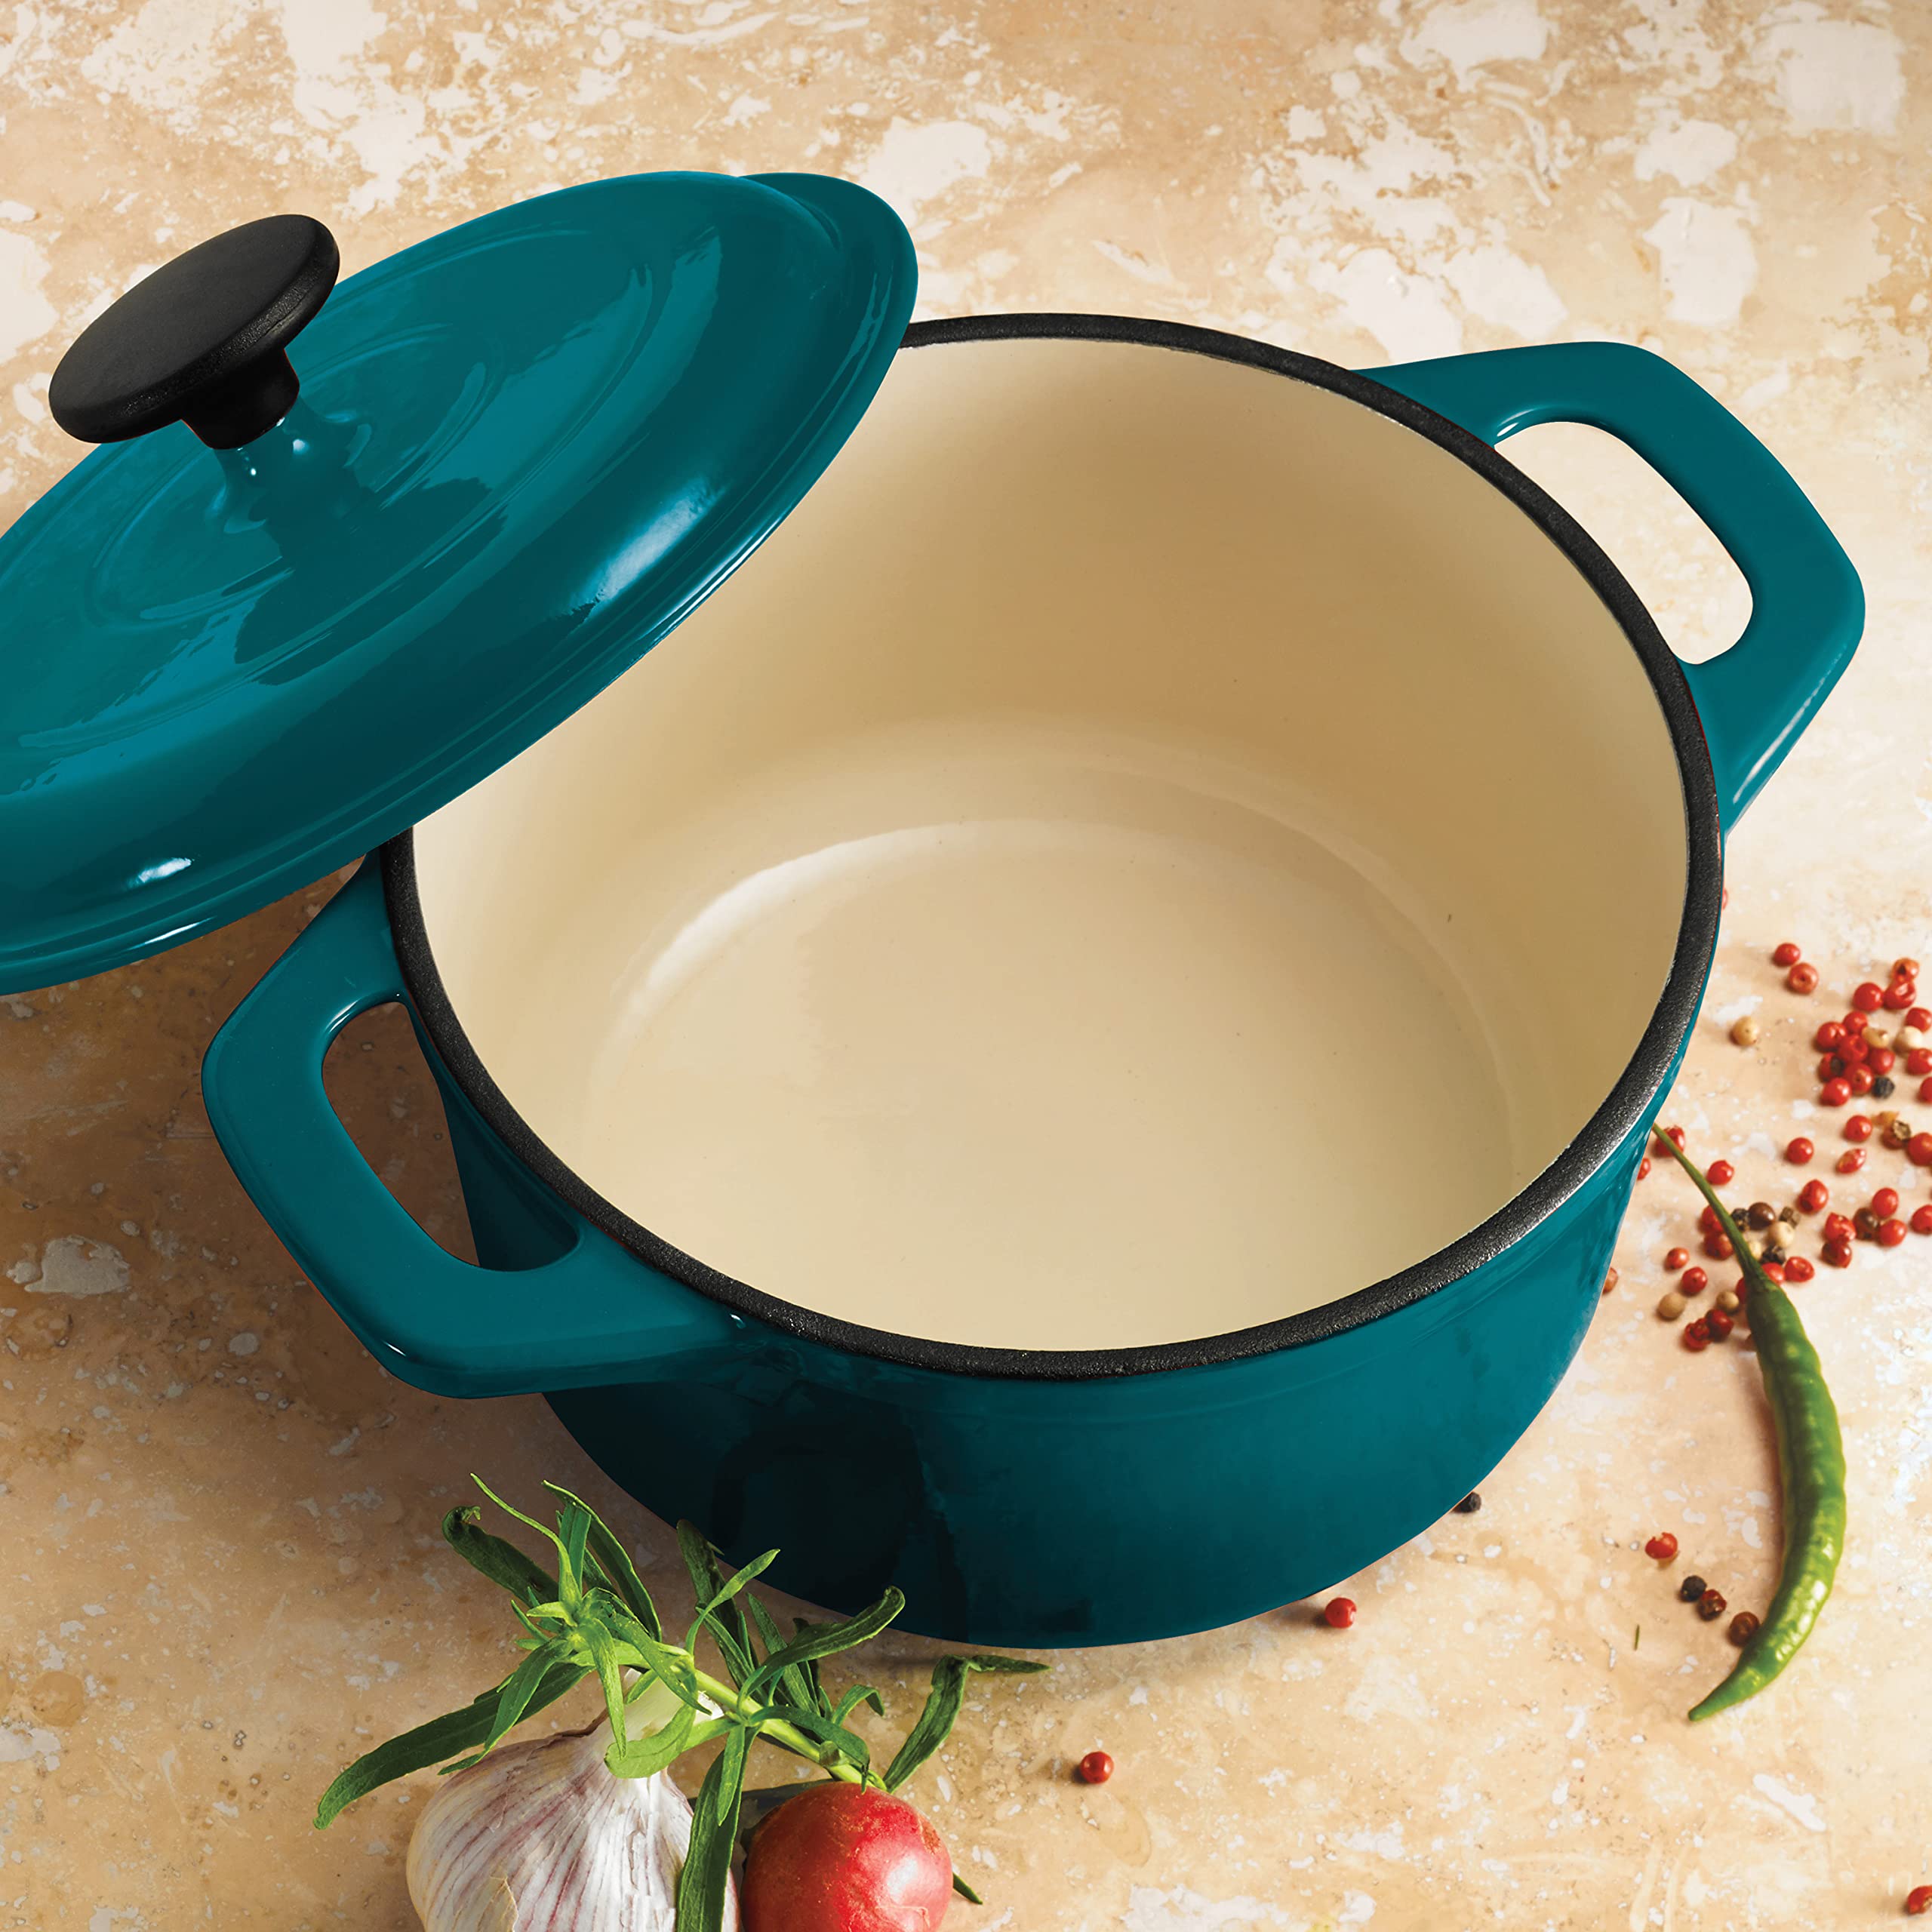 Tramontina Enameled Cast-Iron Dutch Oven 3.5 Qt (Teal), 80131/637DS